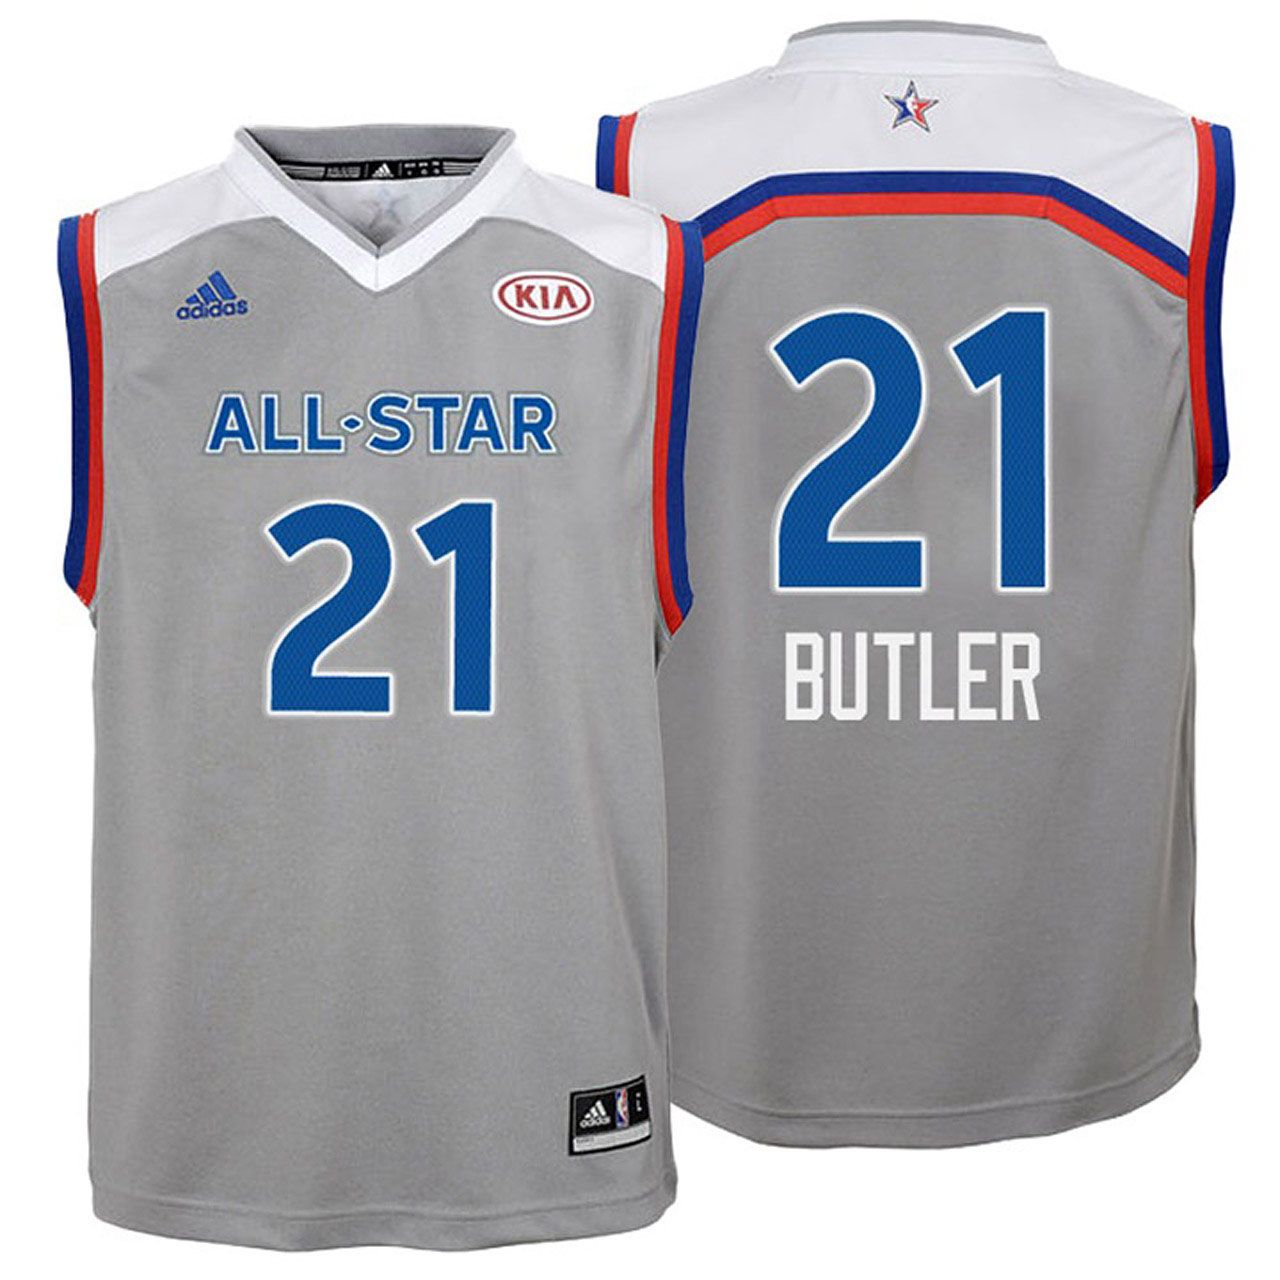 2017 All-Star Youth Bulls Jimmy Butler #21 Eastern Conference Gray Jersey